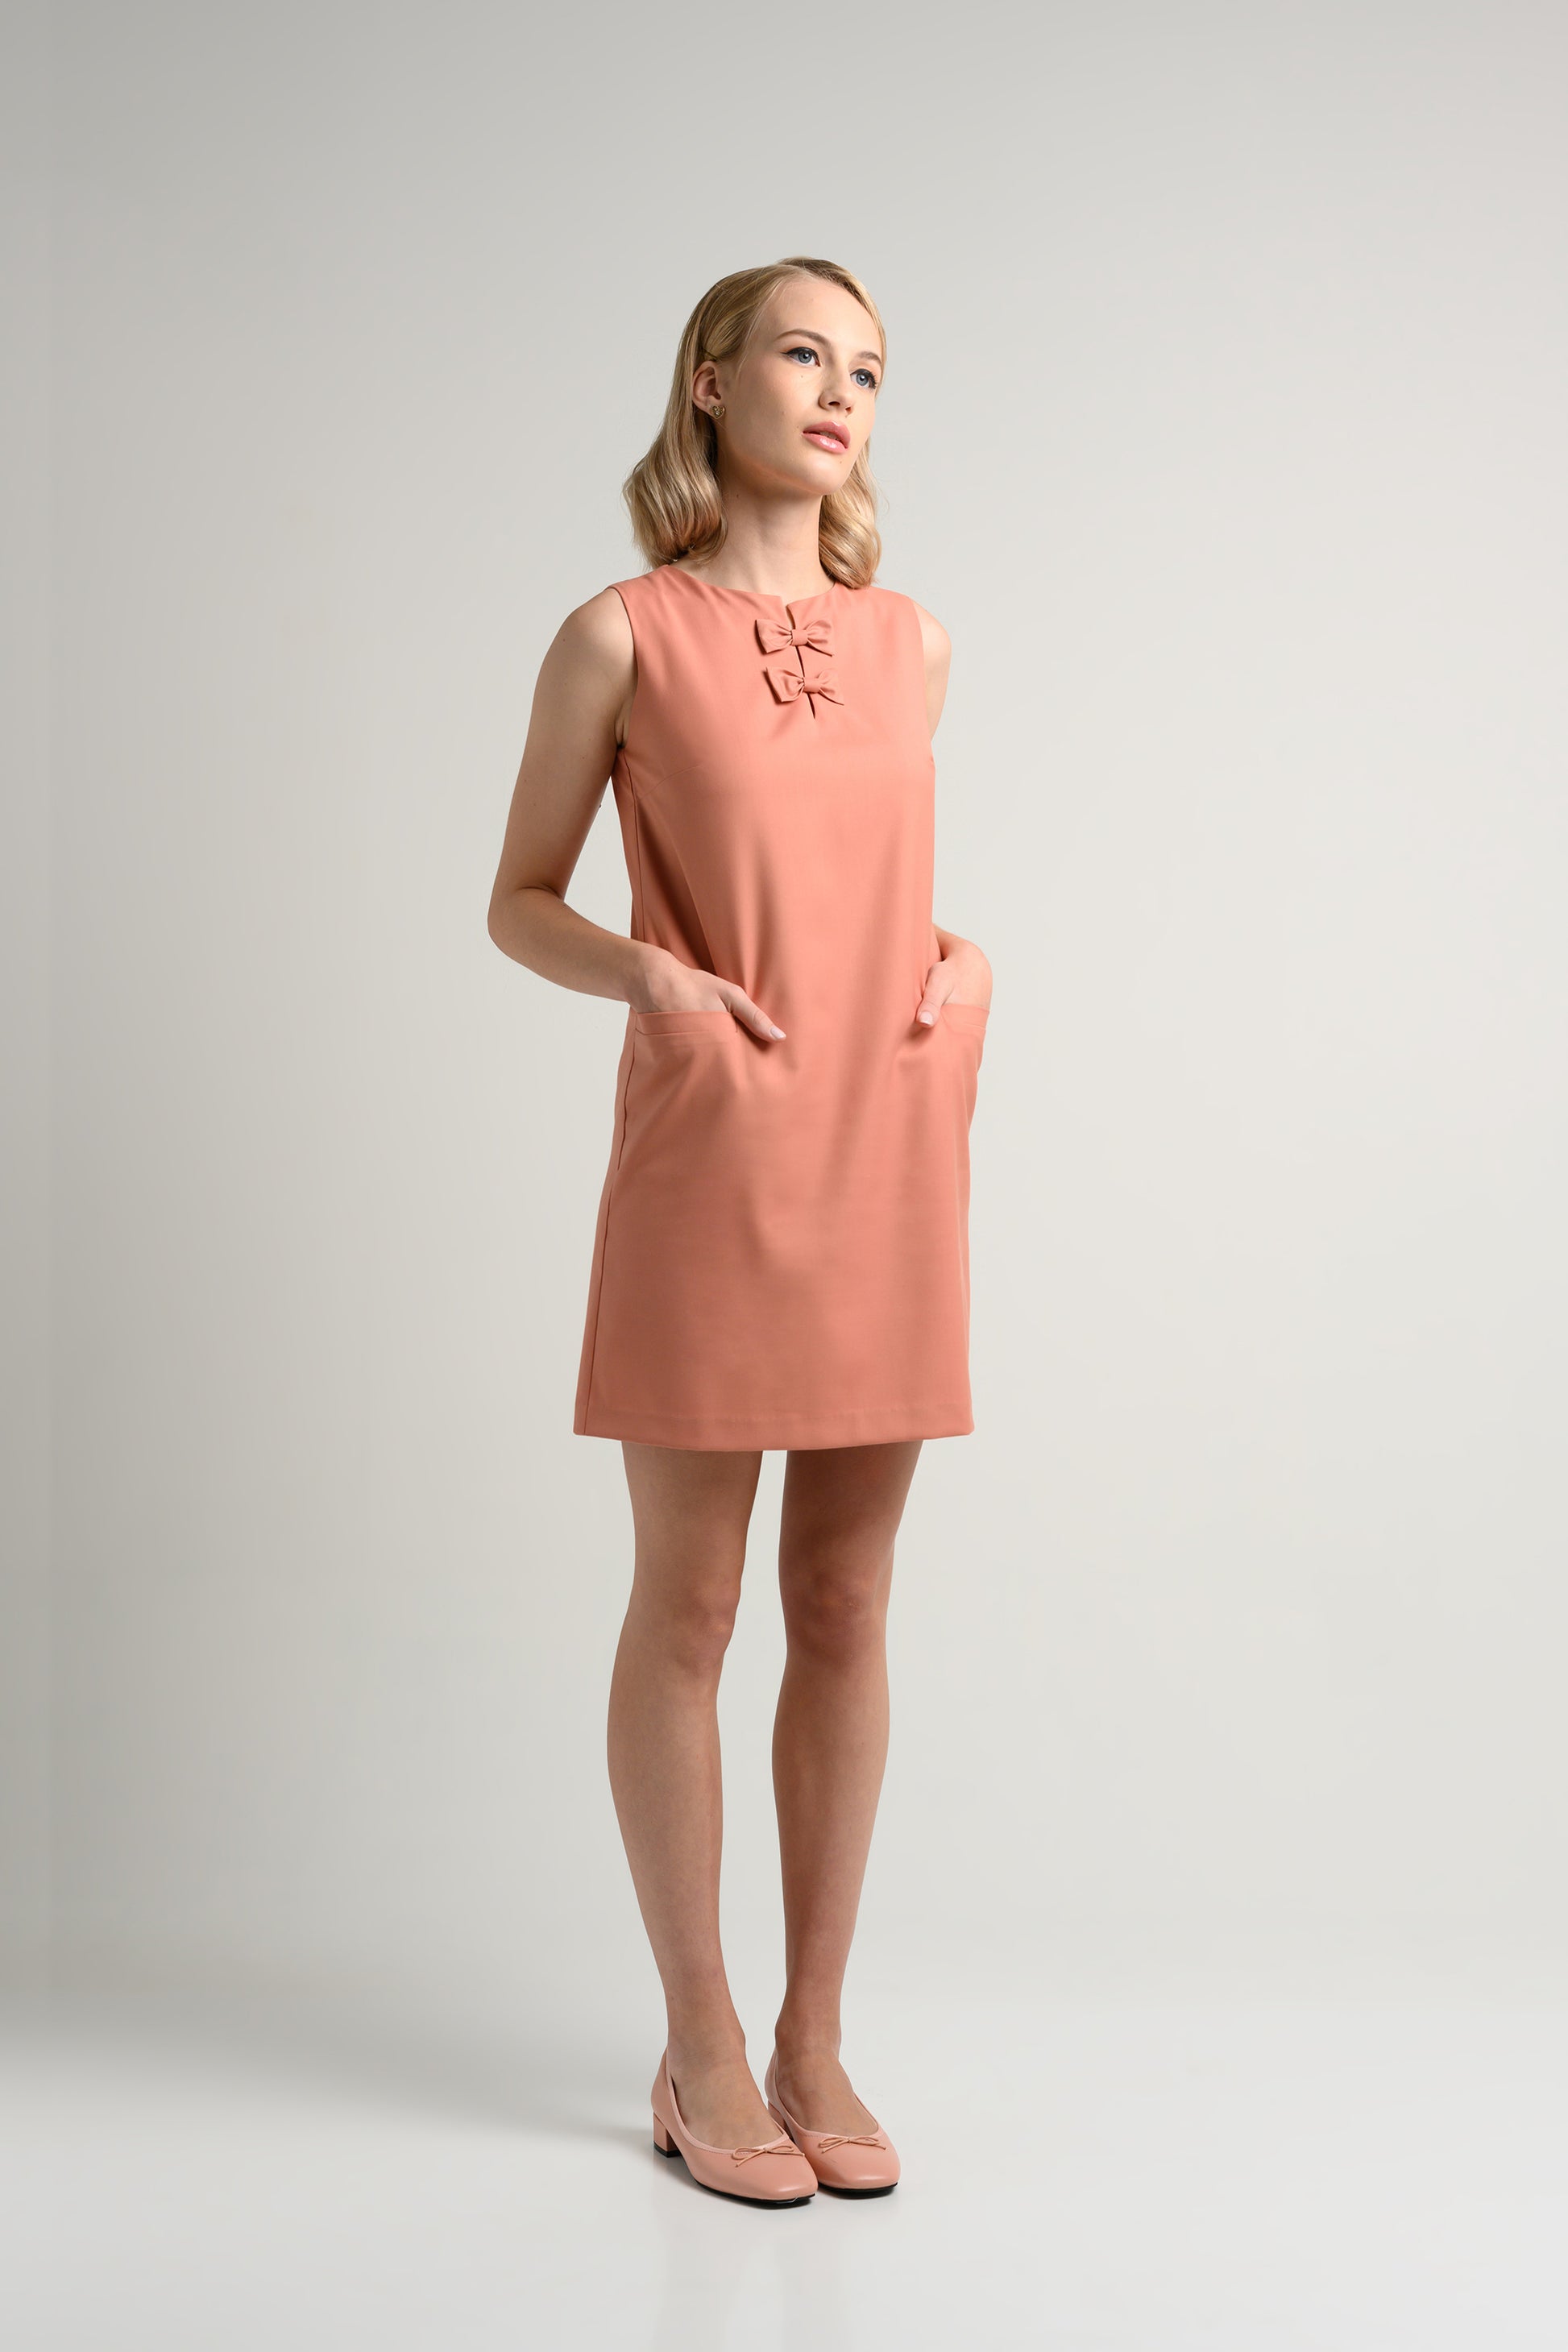 Rosylee Petite Bow Shift Dress - Coral 2